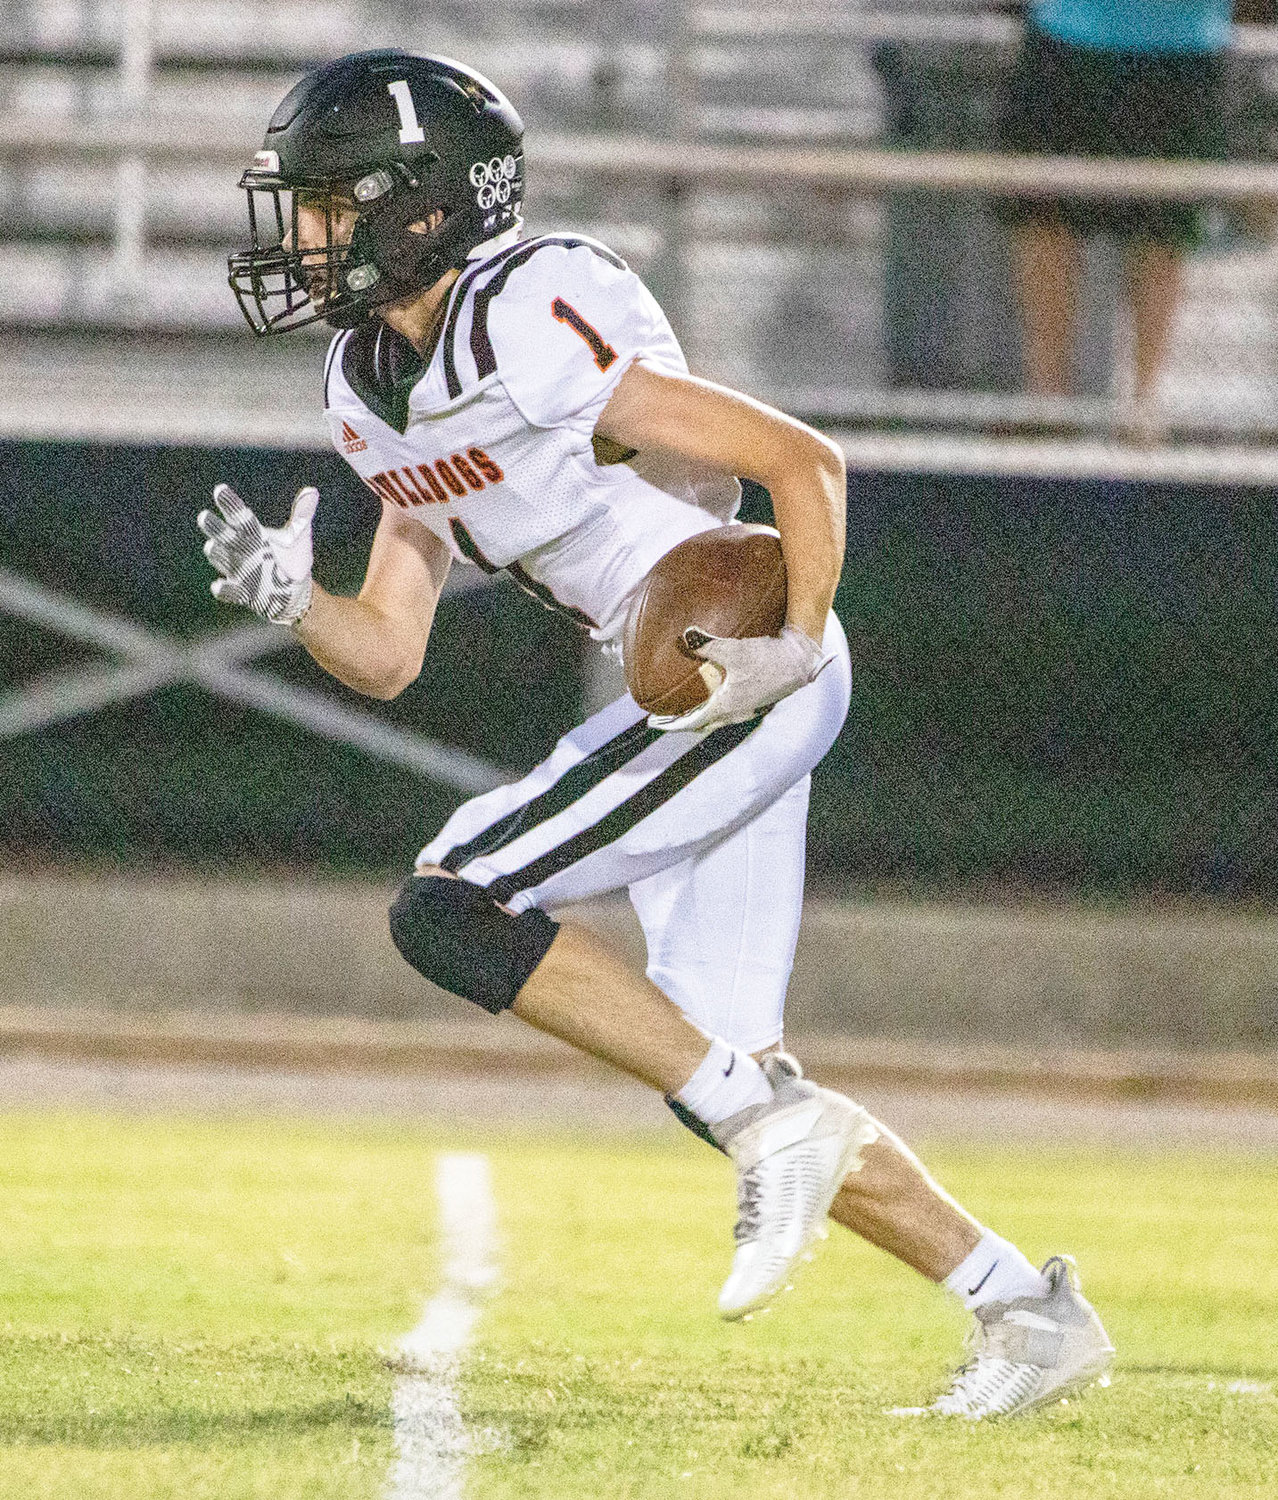 Wayne junior Kaleb Madden runs with the football Friday night during Wayne’s 46-6 win over Lexington. Madden had two carries for 32 yards, as well as two receptions.